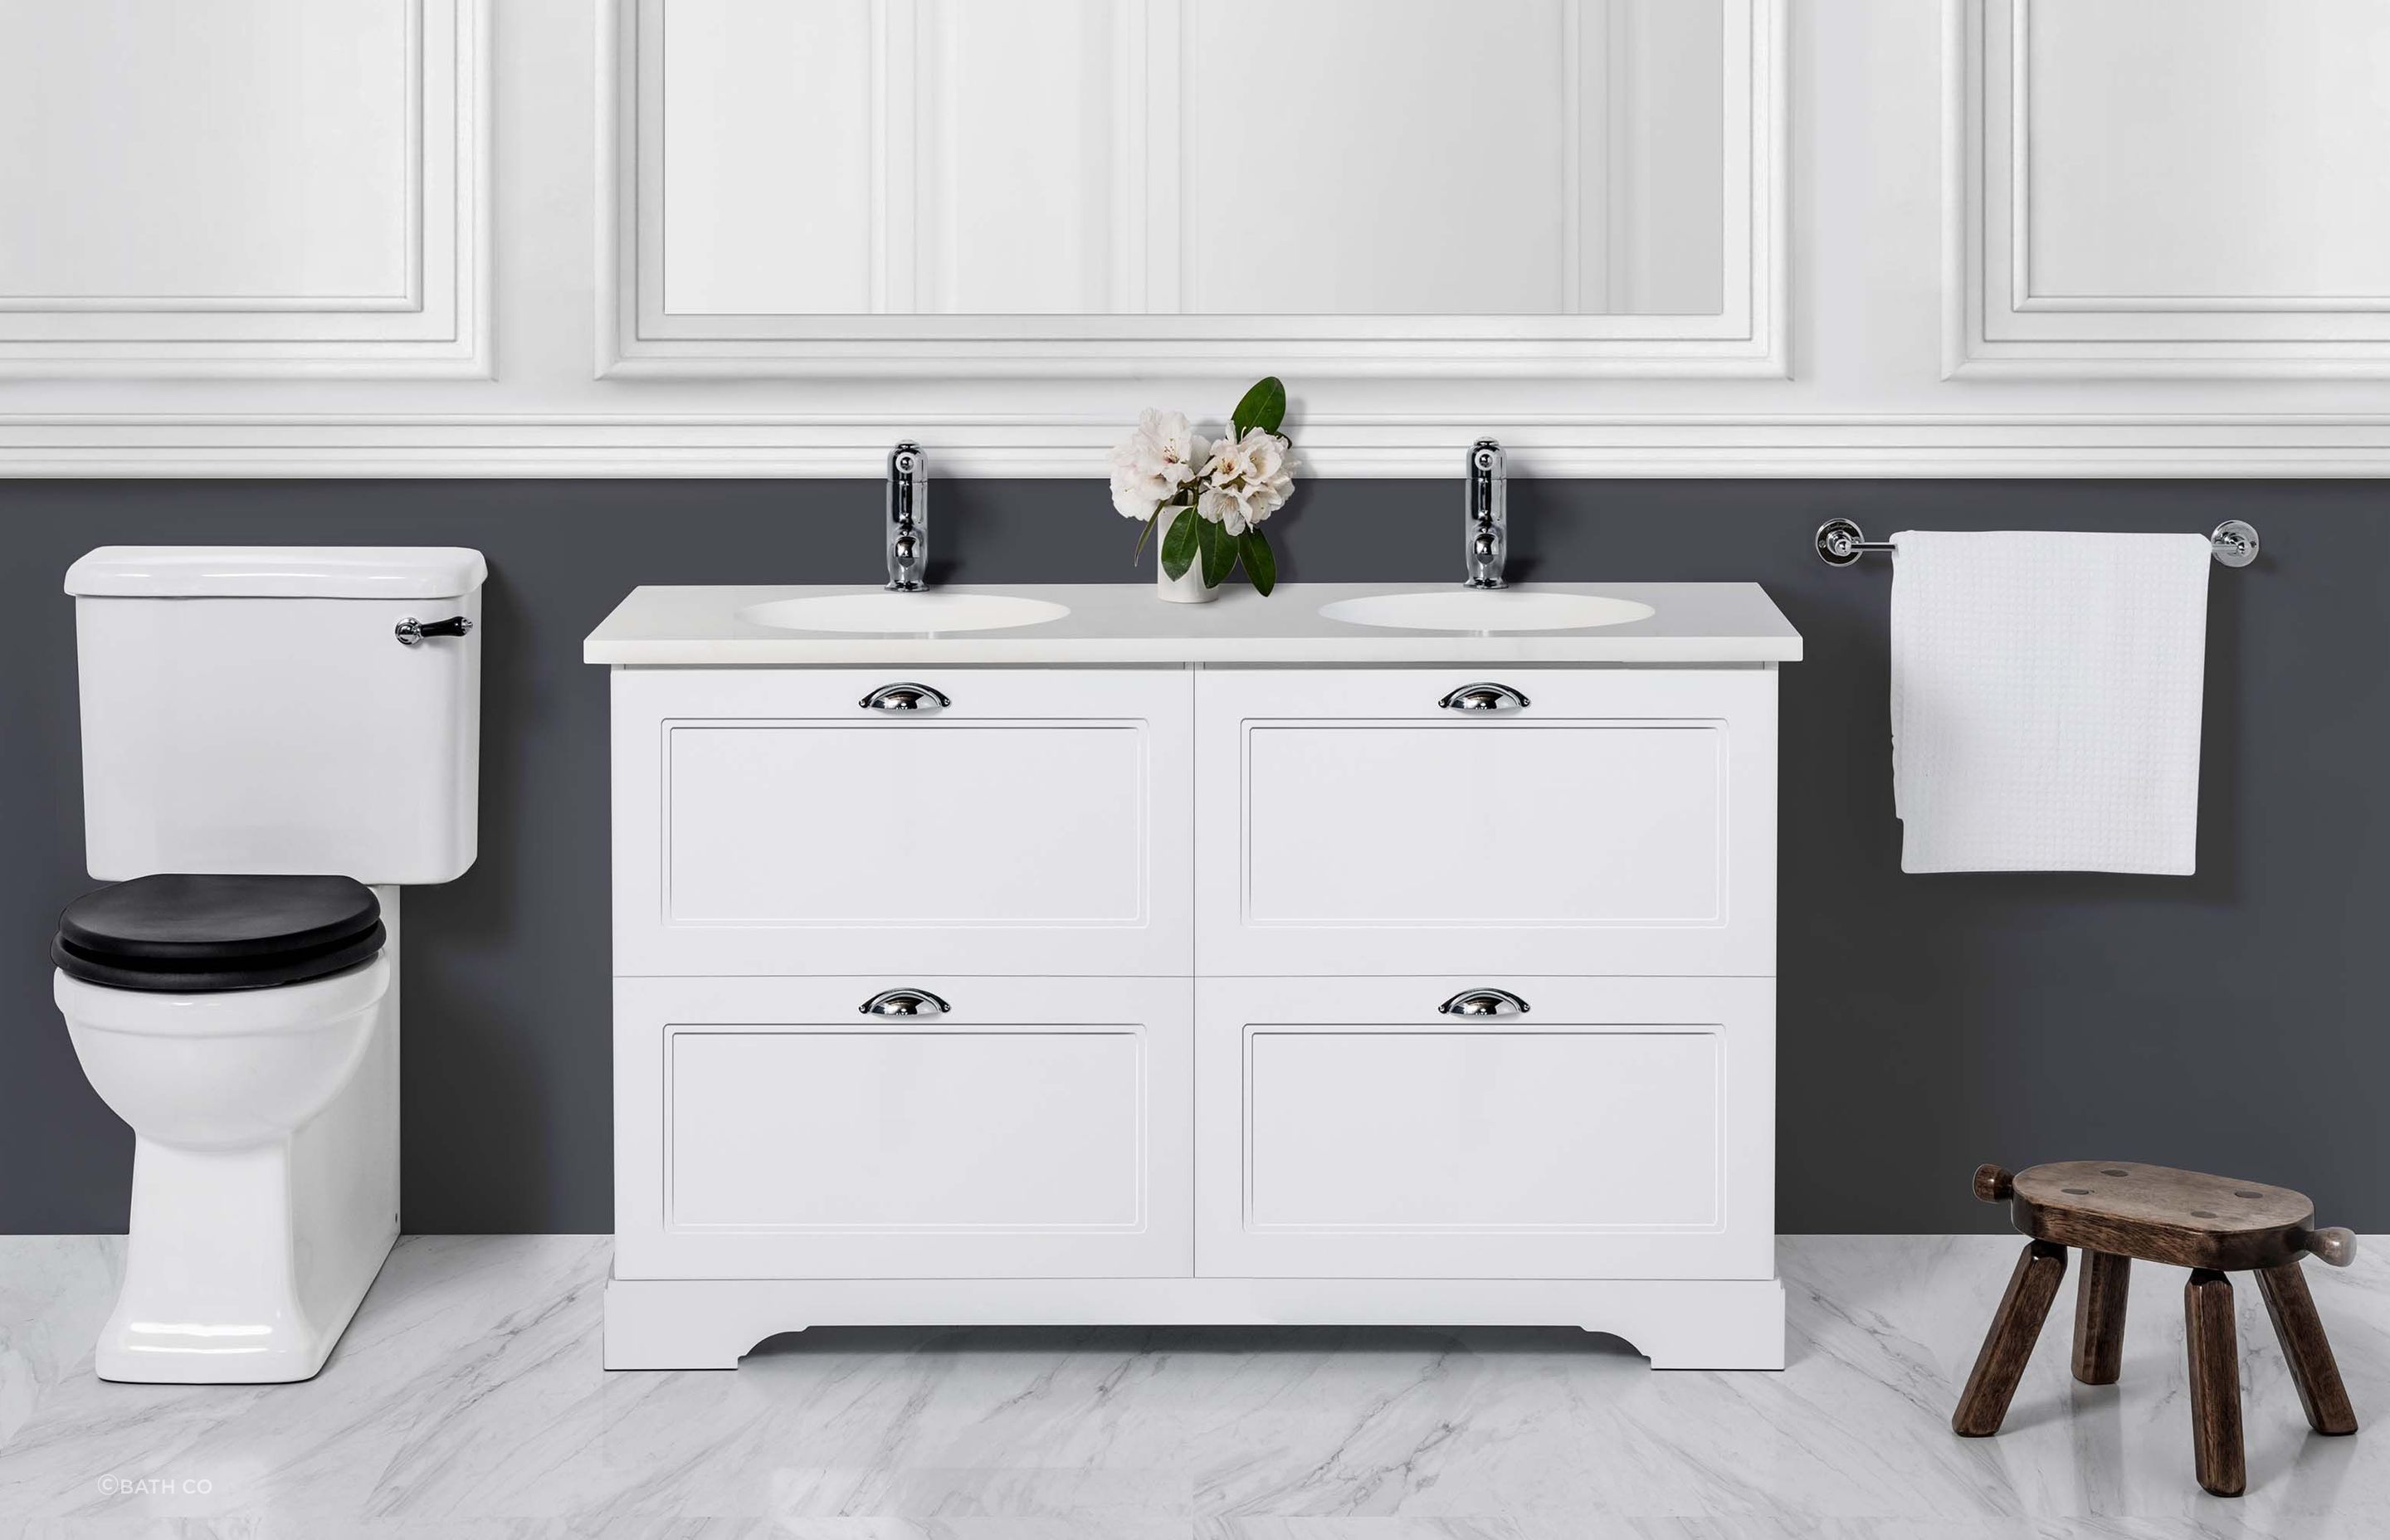 With basins concealed, you've a little more space for decorative touches, beautifully portrayed here with the English Classic 1350 Floor Standing Vanity.